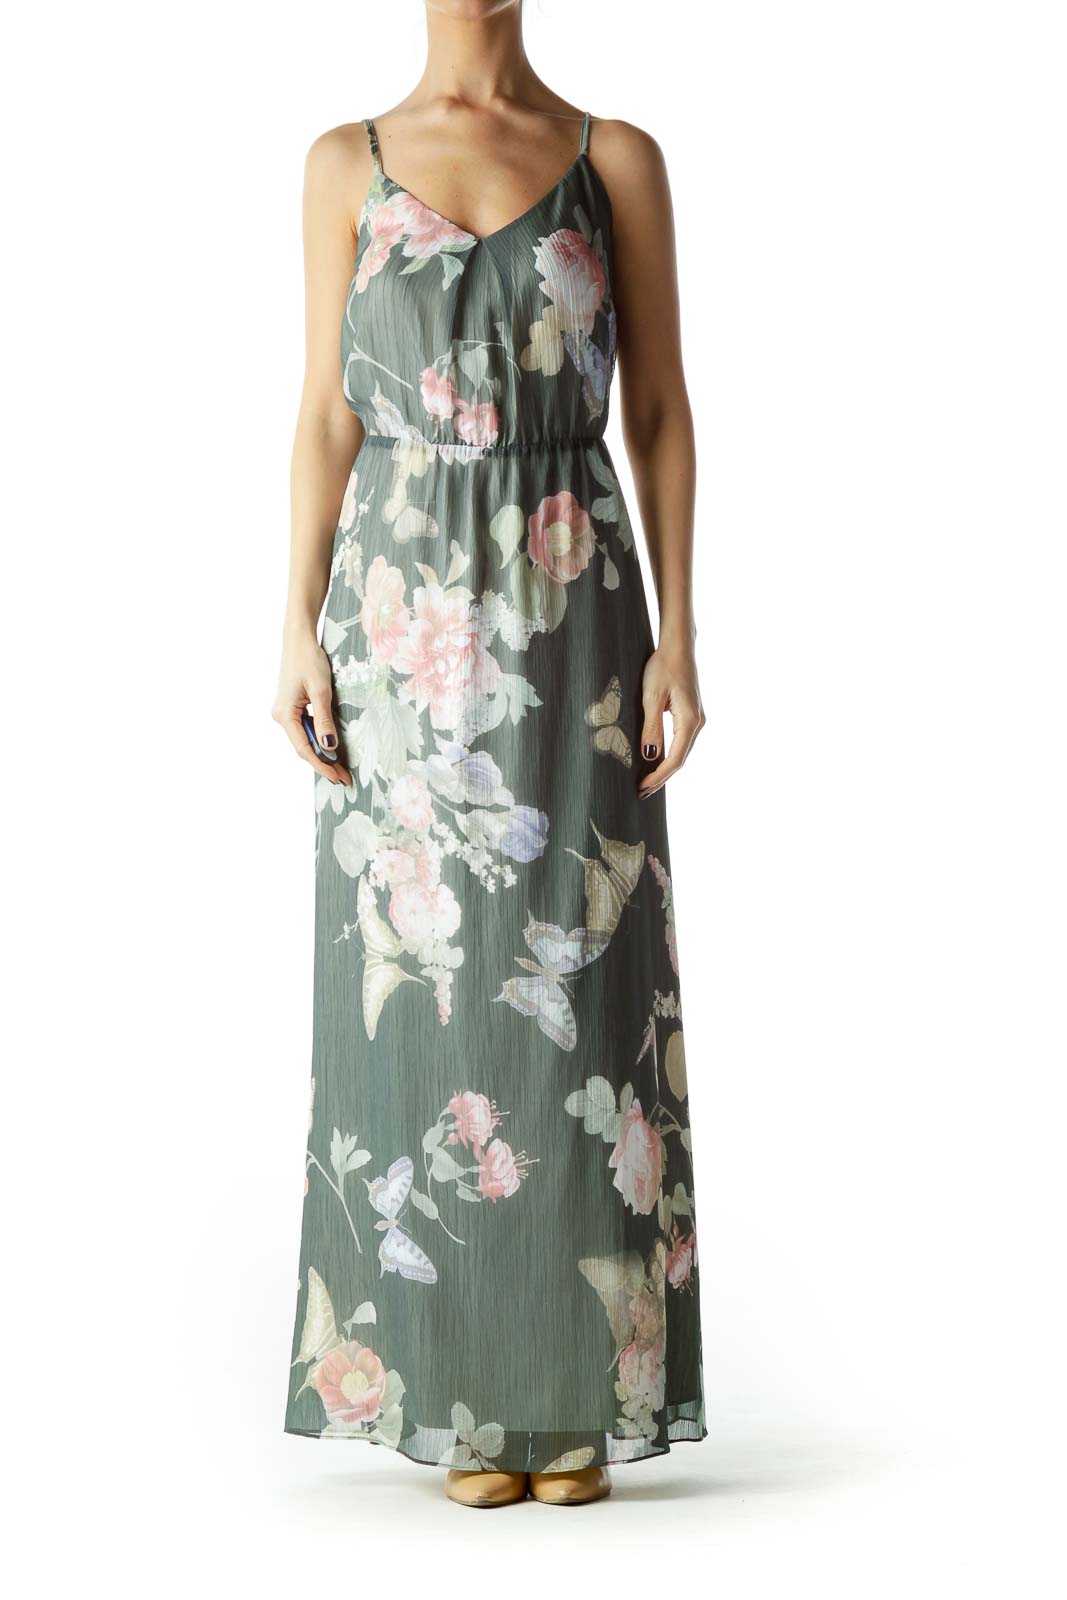 Multicolored Floral Nature Print Long Day Dress Front